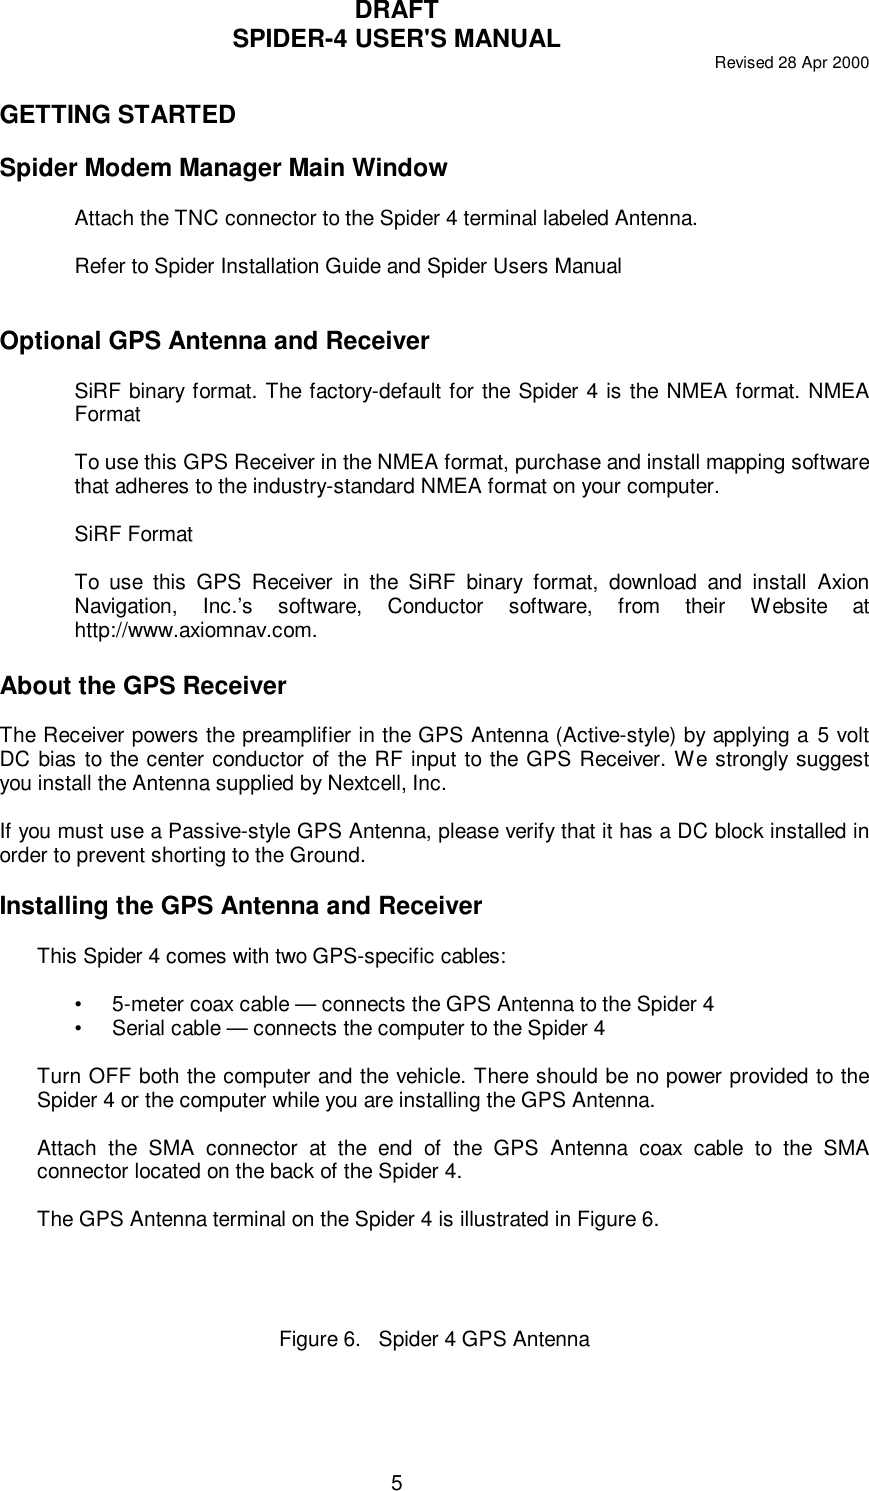 DRAFTSPIDER-4 USER&apos;S MANUAL Revised 28 Apr 20005GETTING STARTEDSpider Modem Manager Main WindowAttach the TNC connector to the Spider 4 terminal labeled Antenna.Refer to Spider Installation Guide and Spider Users ManualOptional GPS Antenna and ReceiverSiRF binary format. The factory-default for the Spider 4 is the NMEA format. NMEAFormatTo use this GPS Receiver in the NMEA format, purchase and install mapping softwarethat adheres to the industry-standard NMEA format on your computer.SiRF FormatTo use this GPS Receiver in the SiRF binary format, download and install AxionNavigation, Inc.’s software, Conductor software, from their Website athttp://www.axiomnav.com.About the GPS ReceiverThe Receiver powers the preamplifier in the GPS Antenna (Active-style) by applying a 5 voltDC bias to the center conductor of the RF input to the GPS Receiver. We strongly suggestyou install the Antenna supplied by Nextcell, Inc.If you must use a Passive-style GPS Antenna, please verify that it has a DC block installed inorder to prevent shorting to the Ground.Installing the GPS Antenna and ReceiverThis Spider 4 comes with two GPS-specific cables:•5-meter coax cable — connects the GPS Antenna to the Spider 4•Serial cable — connects the computer to the Spider 4Turn OFF both the computer and the vehicle. There should be no power provided to theSpider 4 or the computer while you are installing the GPS Antenna.Attach the SMA connector at the end of the GPS Antenna coax cable to the SMAconnector located on the back of the Spider 4.The GPS Antenna terminal on the Spider 4 is illustrated in Figure 6.Figure 6.   Spider 4 GPS Antenna